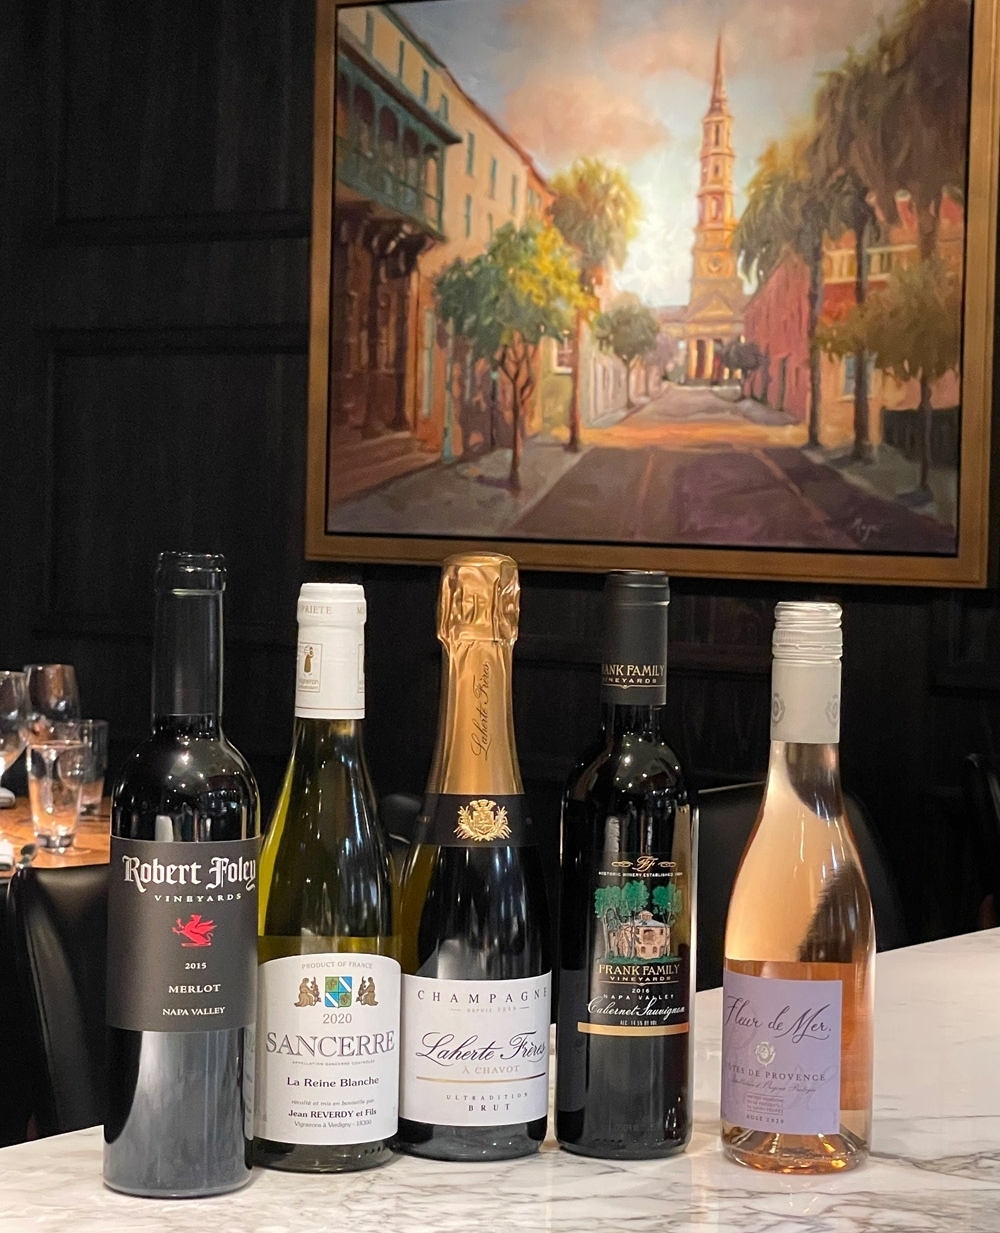 Check out our wine list to see our half bottles - 375ml bottles that are sized to enjoy solo or with a friend! The complete list of all wines by the bottle and by the glass is at EstablishmentCHS.com/wine.⁠
⁠
#winenot #smallbottles #chsdrinks #chseats #chswine #southofbroad #datenight